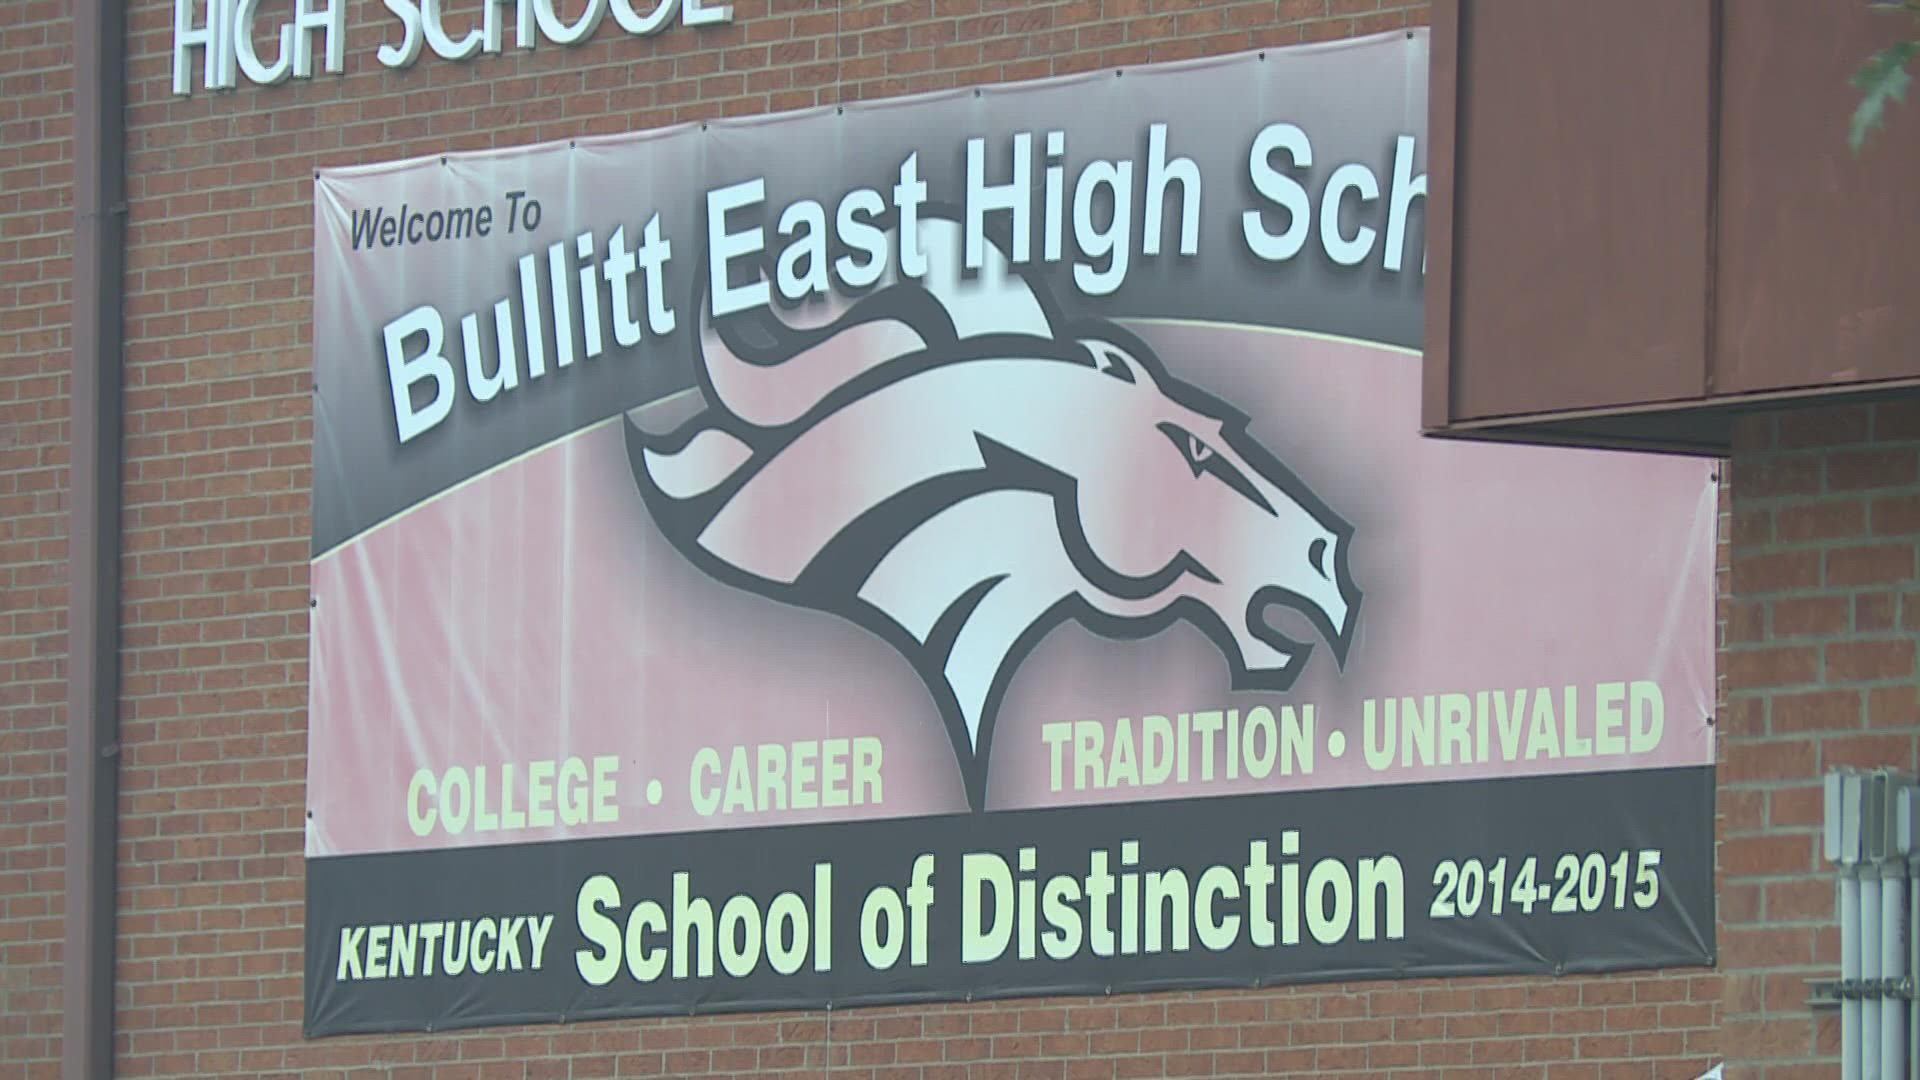 Officials said the Bullitt East student made the threat on Saturday. Authorities took swift action and determined its not credible.